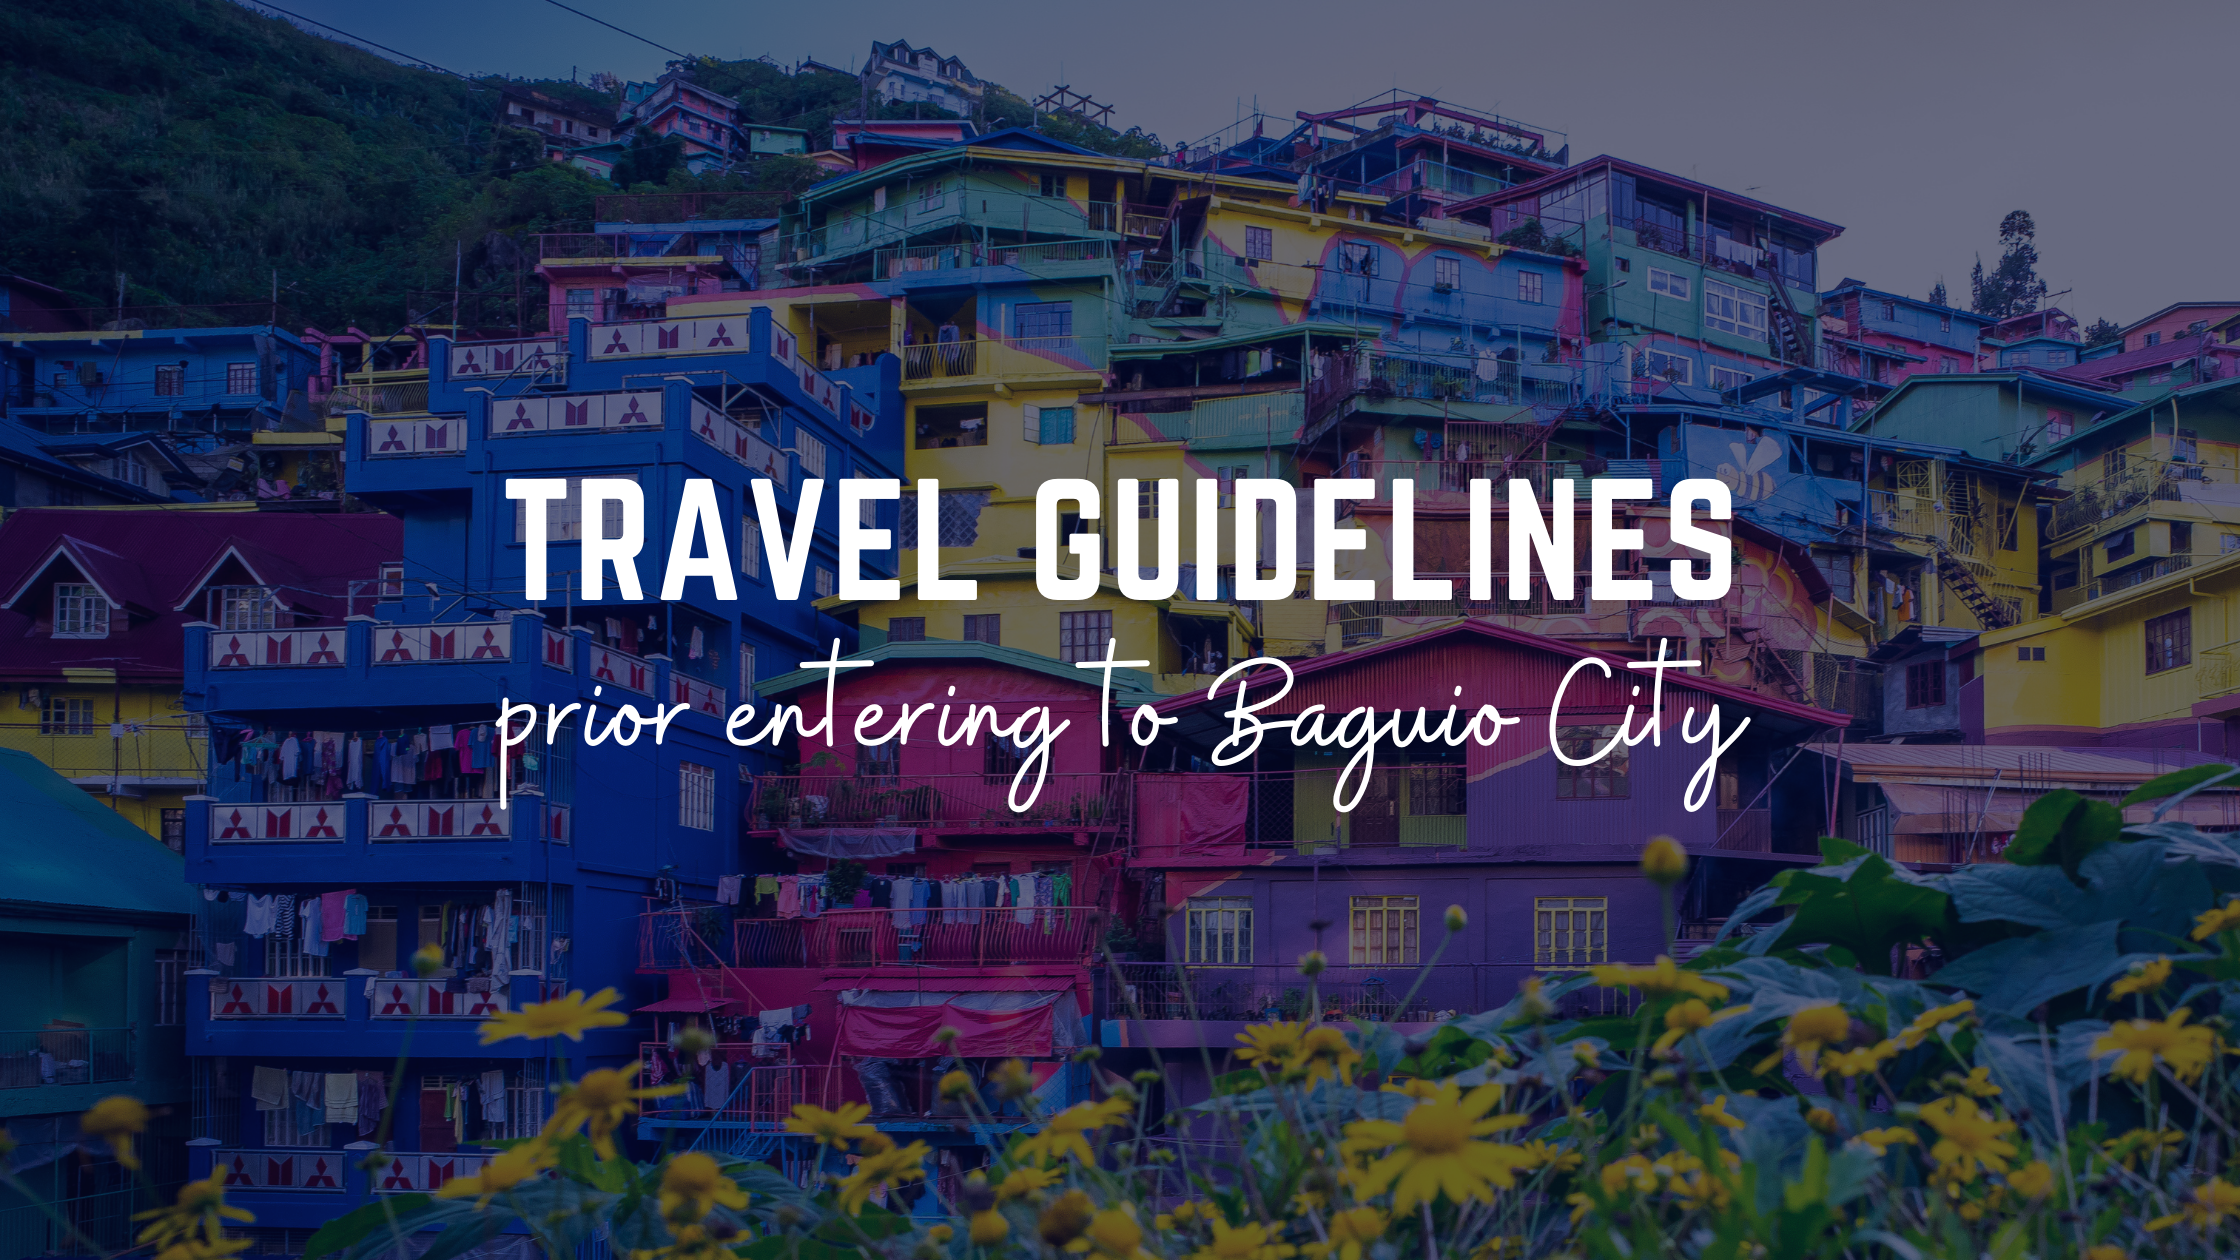 Travel Guidelines to Baguio City